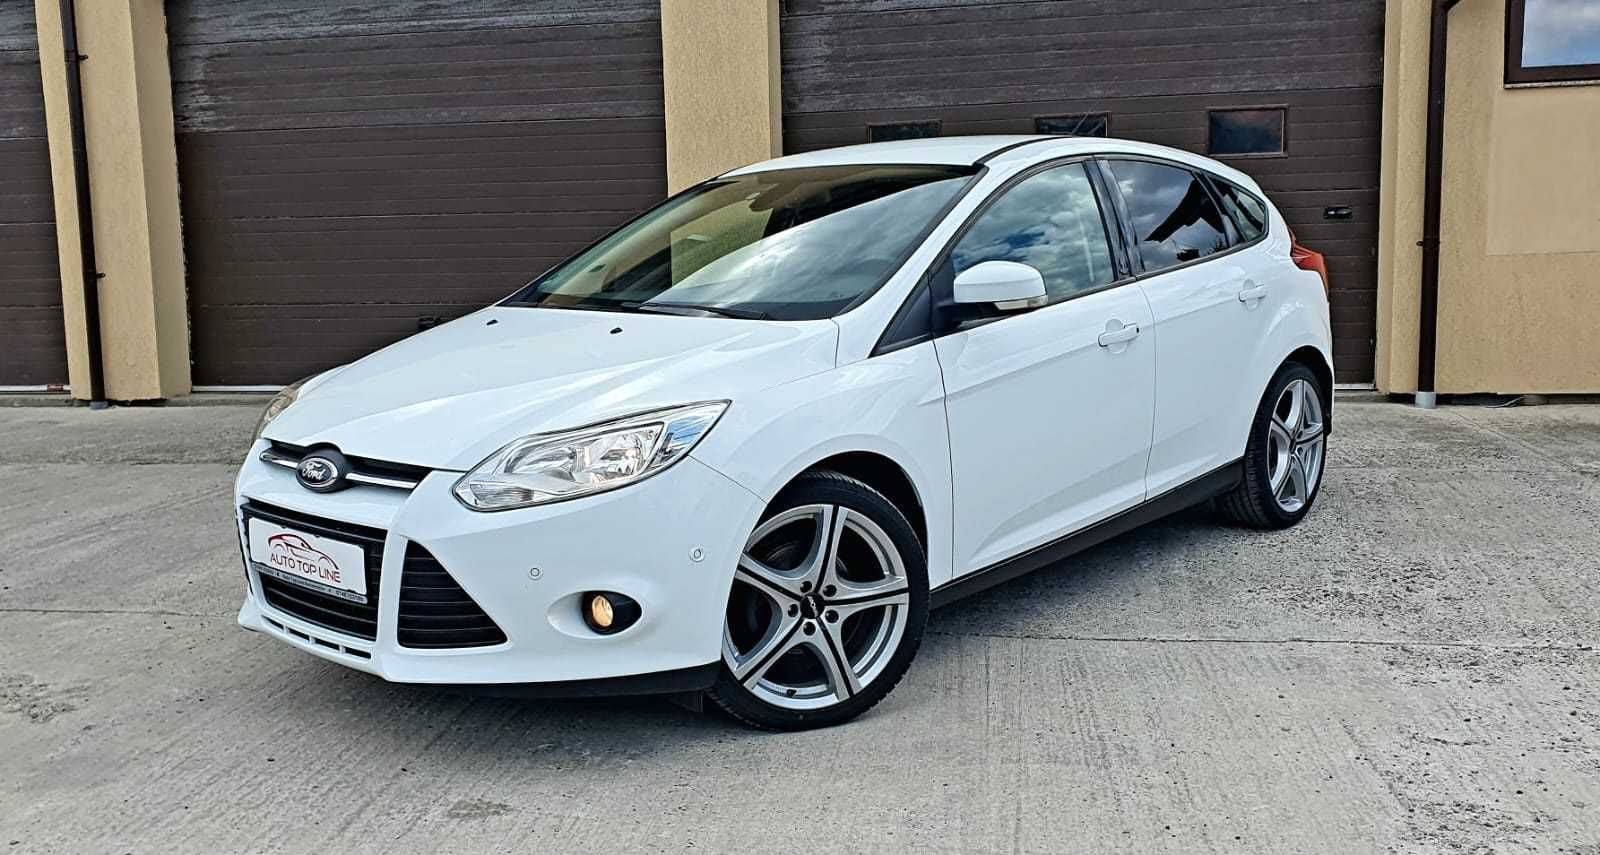 Ford Focus -UEFA Champions League EDITION-1.0 Eco Boost-101 cp-Euro 5